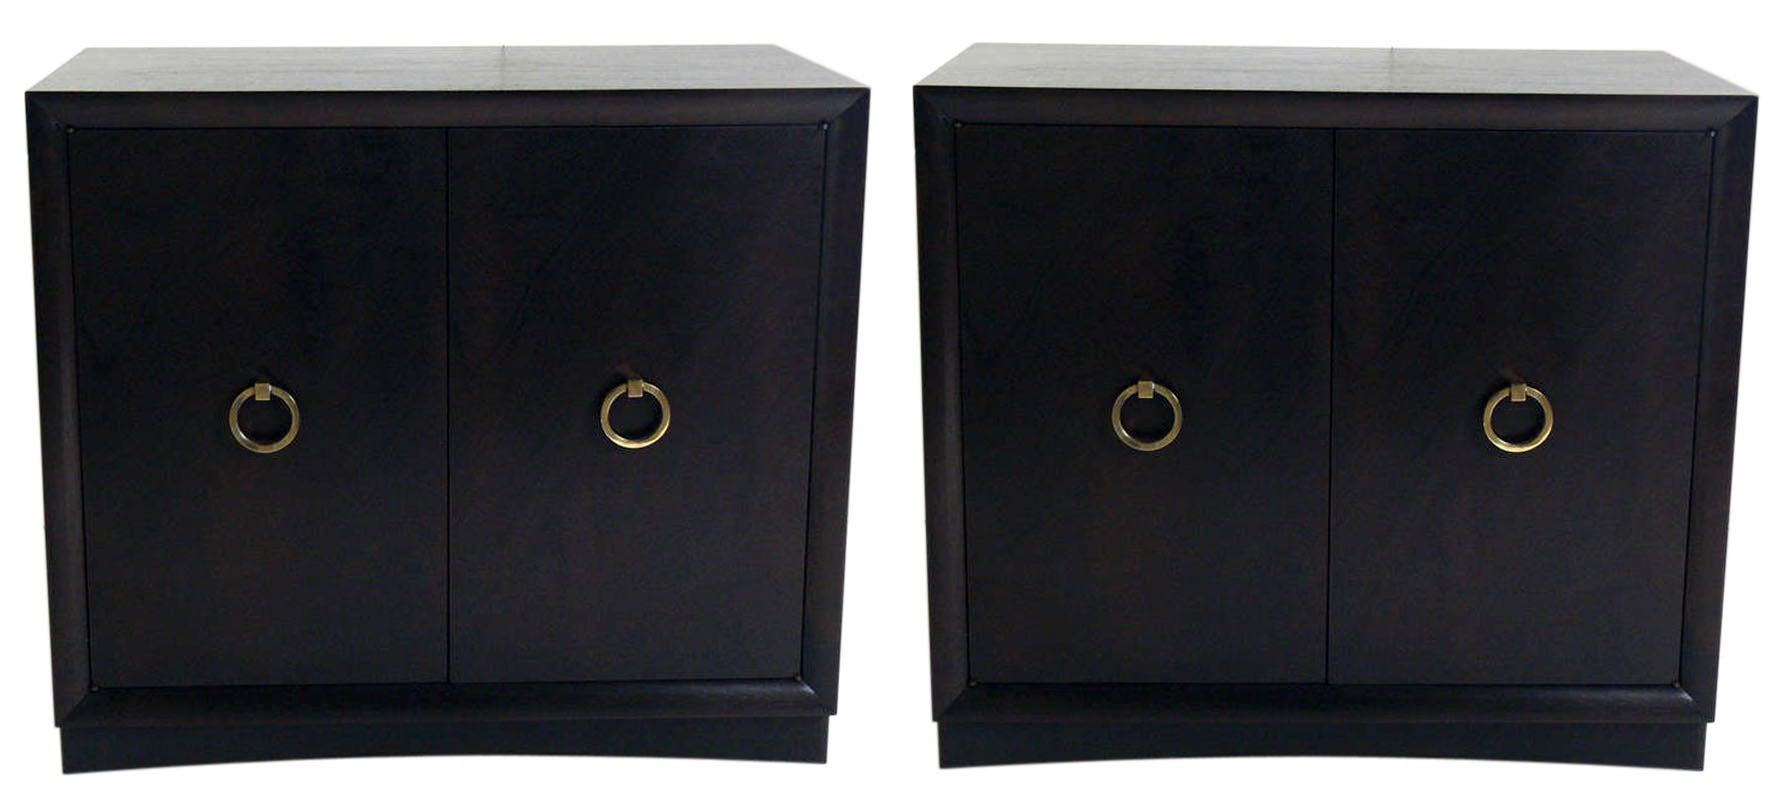 Pair of T.H. Robsjohn-Gibbings Credenzas or Cabinets with Brass Ring Pulls